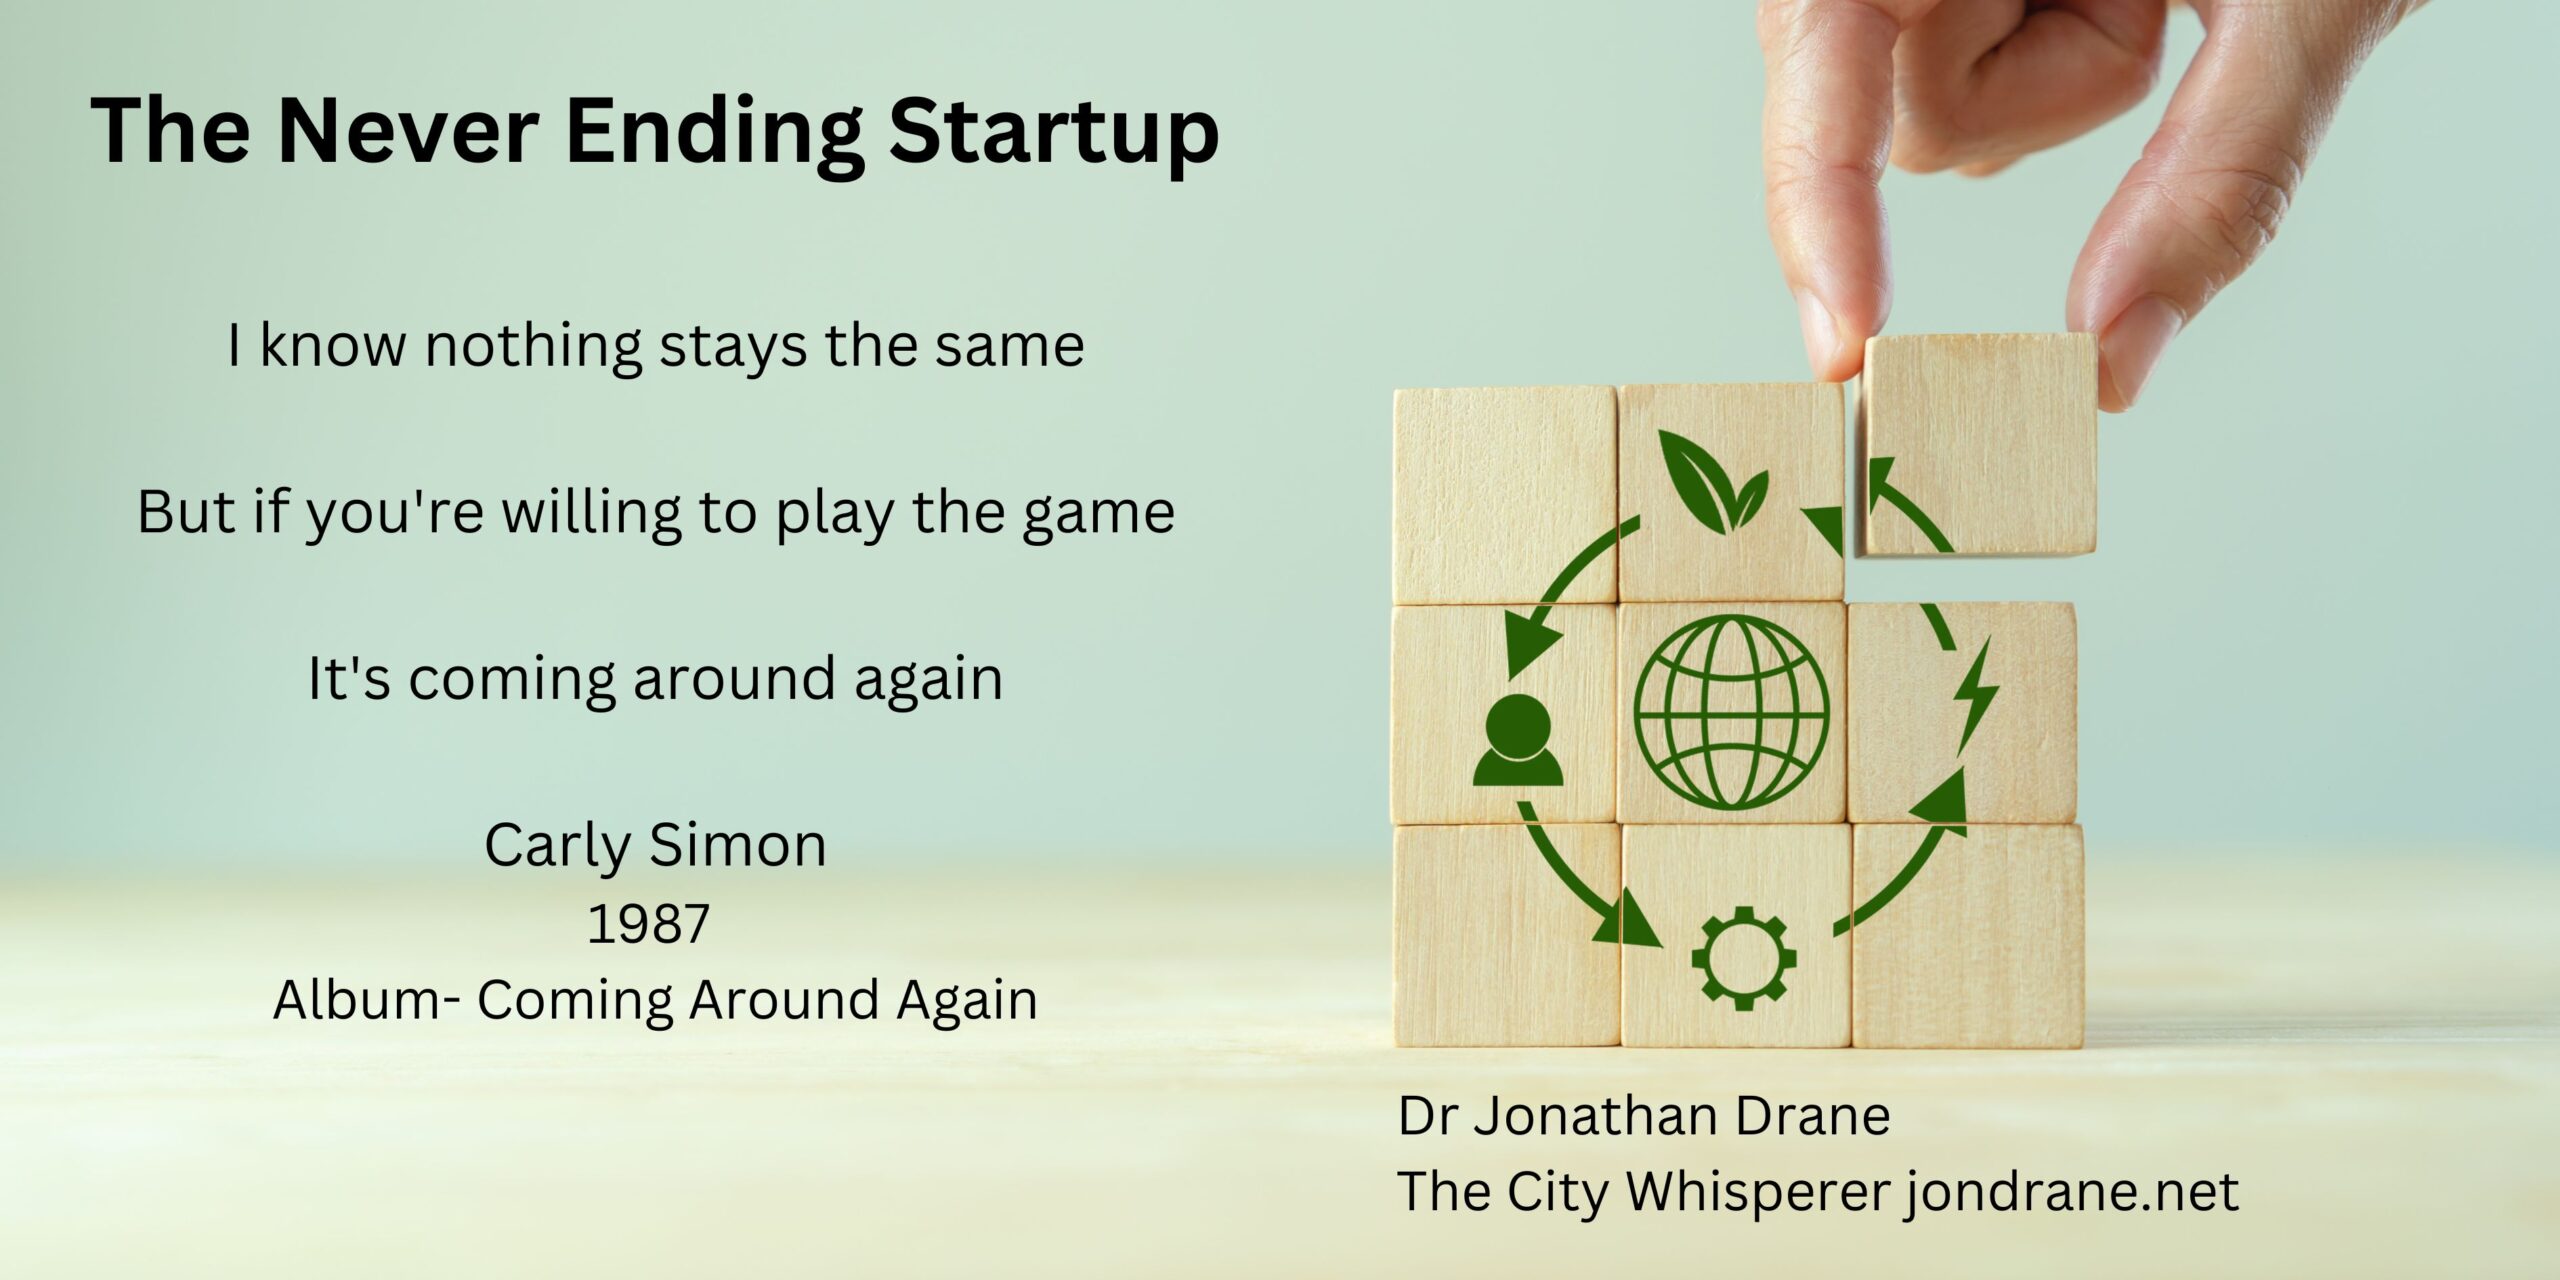 Startup journey and stories. The Never Ending Startup Podcast by Dr Jon Drane The City Whisperer. on jondrane.net Startup journey and stories of longevity Quote Carly Simon - Song- Its coming around again